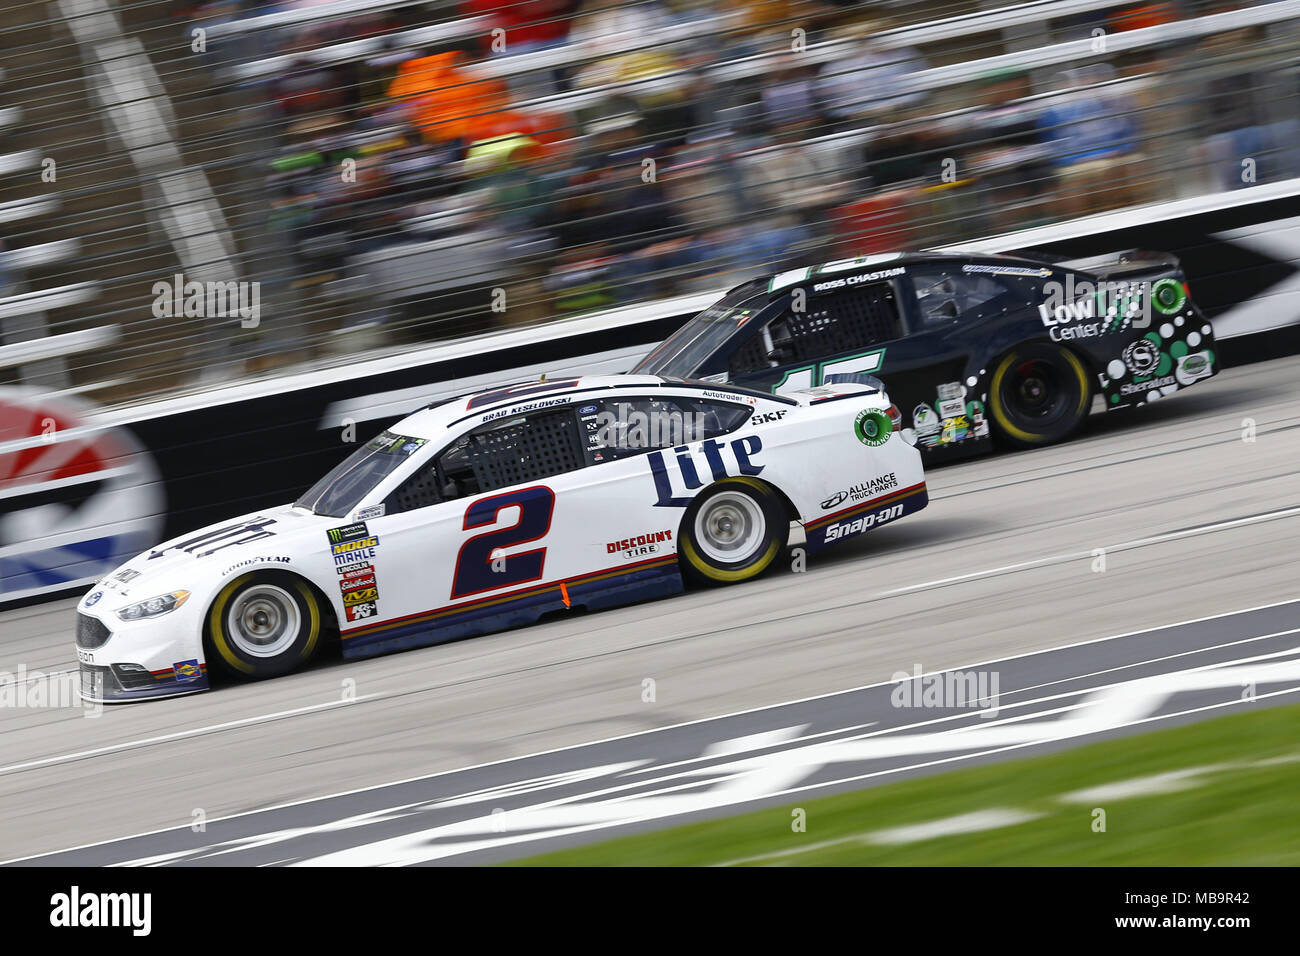 Ft. Worth, Texas, USA. 8th Apr, 2018. April 08, 2018 - Ft. Worth, Texas, USA: Brad Keselowski (2) and Ross Chastain (15) battle for position during the O'Reilly Auto Parts 500 at Texas Motor Speedway in Ft. Worth, Texas. Credit: Chris Owens Asp Inc/ASP/ZUMA Wire/Alamy Live News Stock Photo